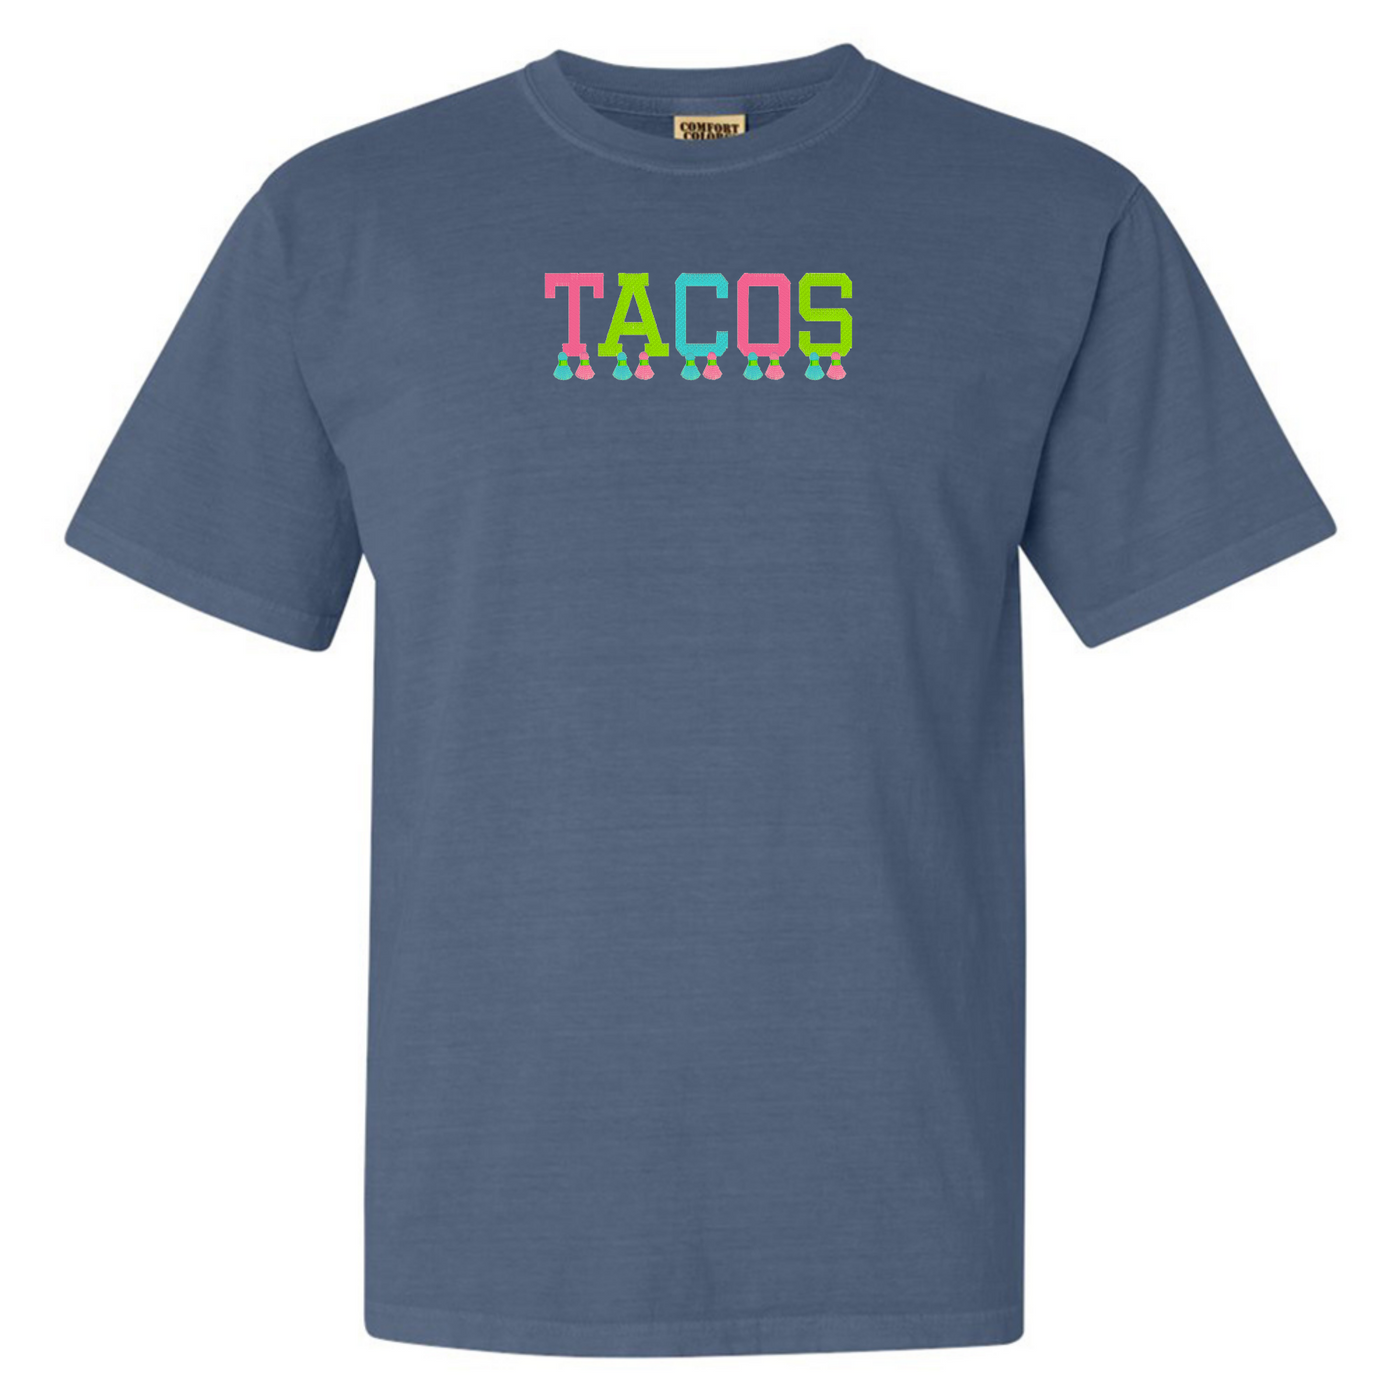 Embroidered Tasseled 'Tacos' T-Shirt